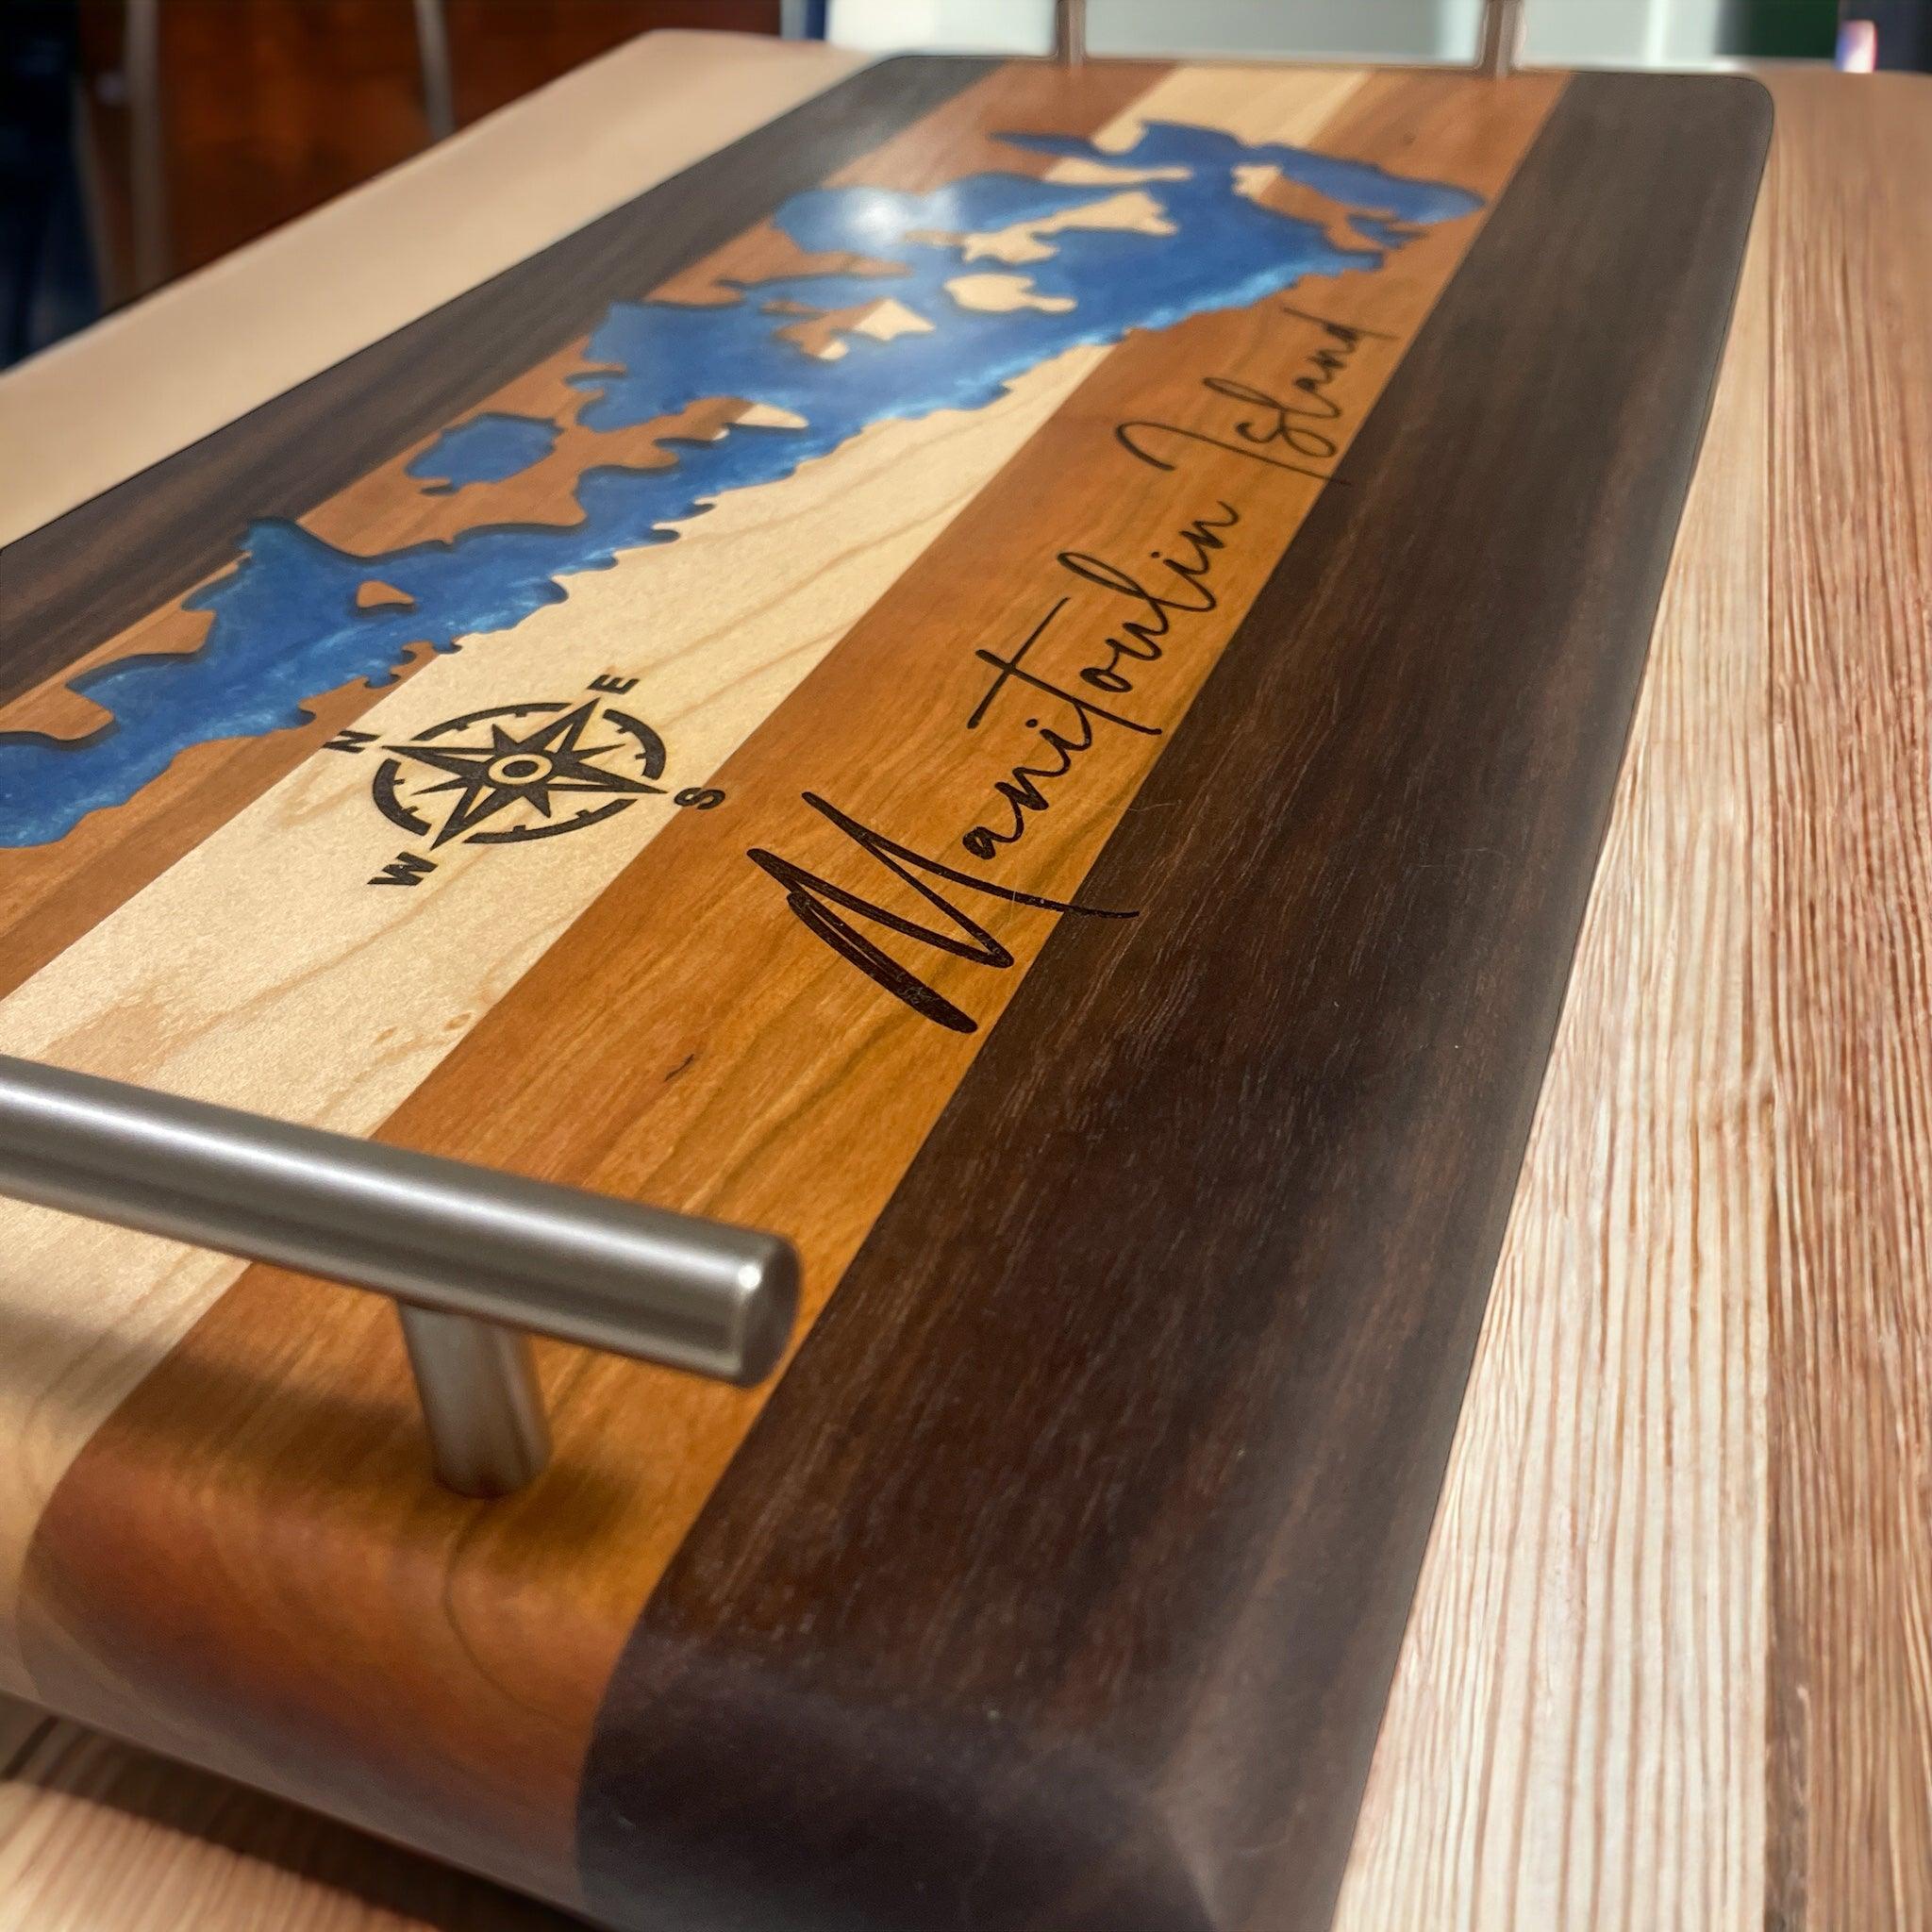 Manitoulin serving board - We have the wood